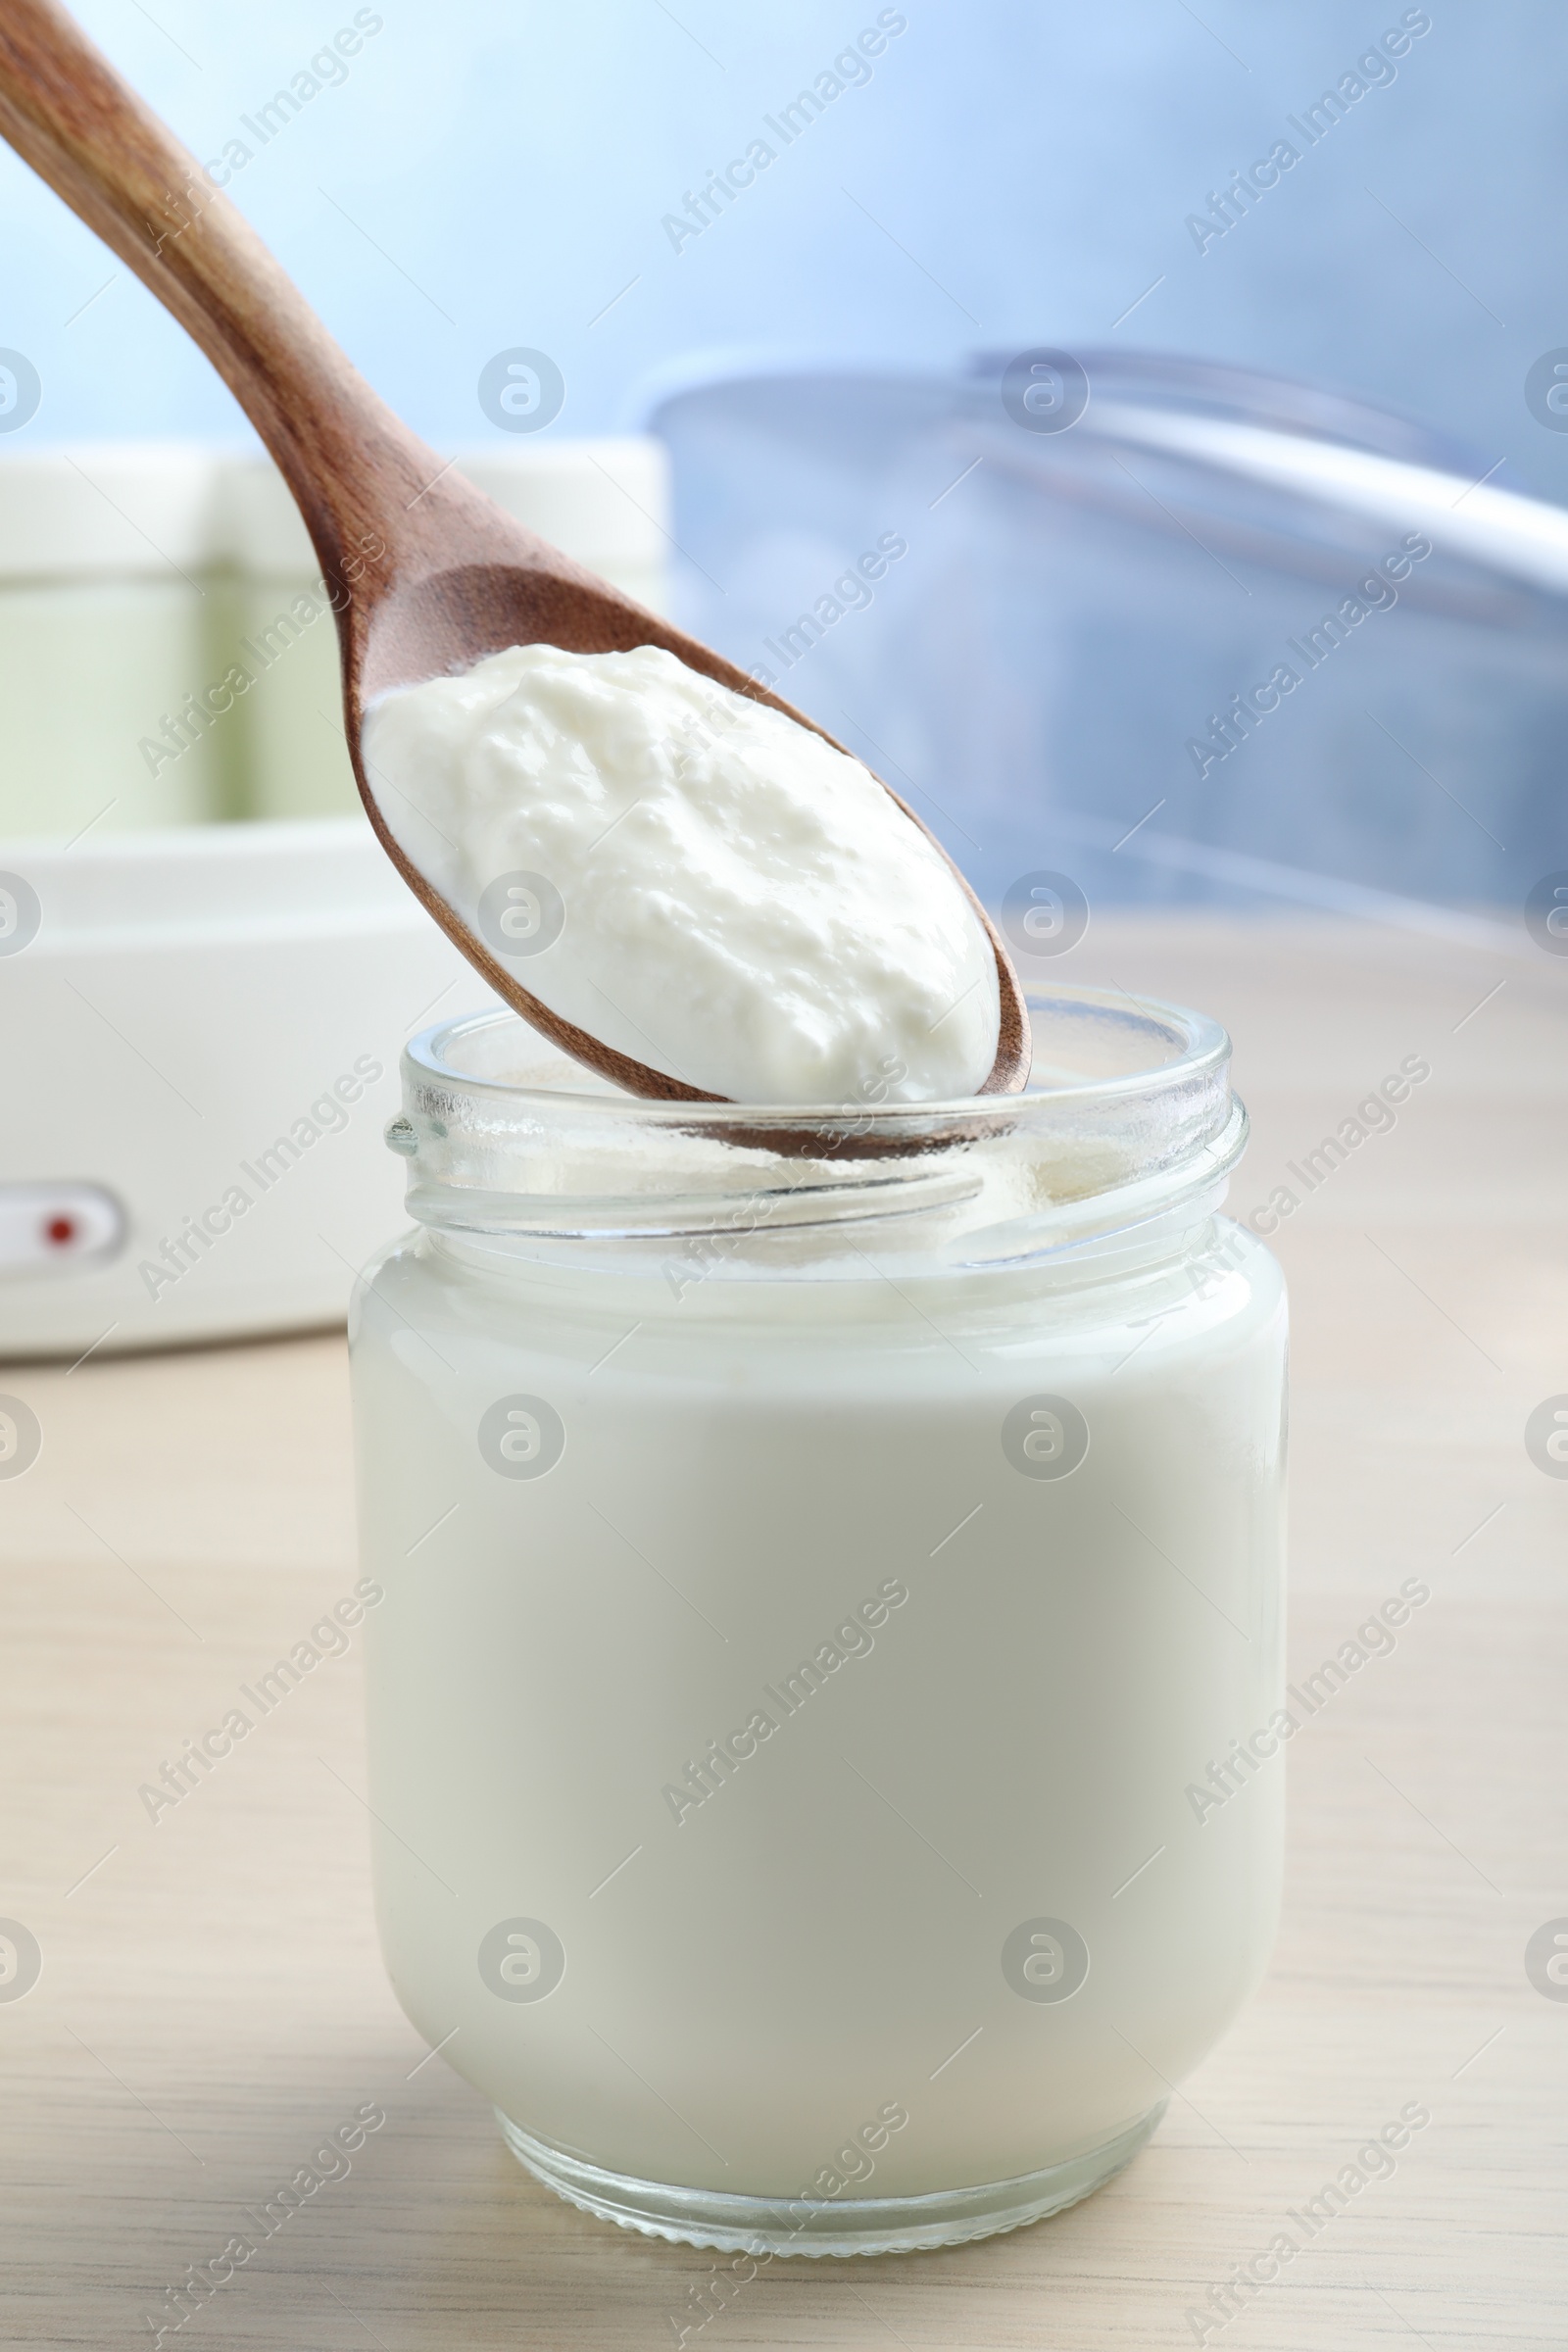 Photo of Spoon with tasty yogurt over glass jar on white wooden table